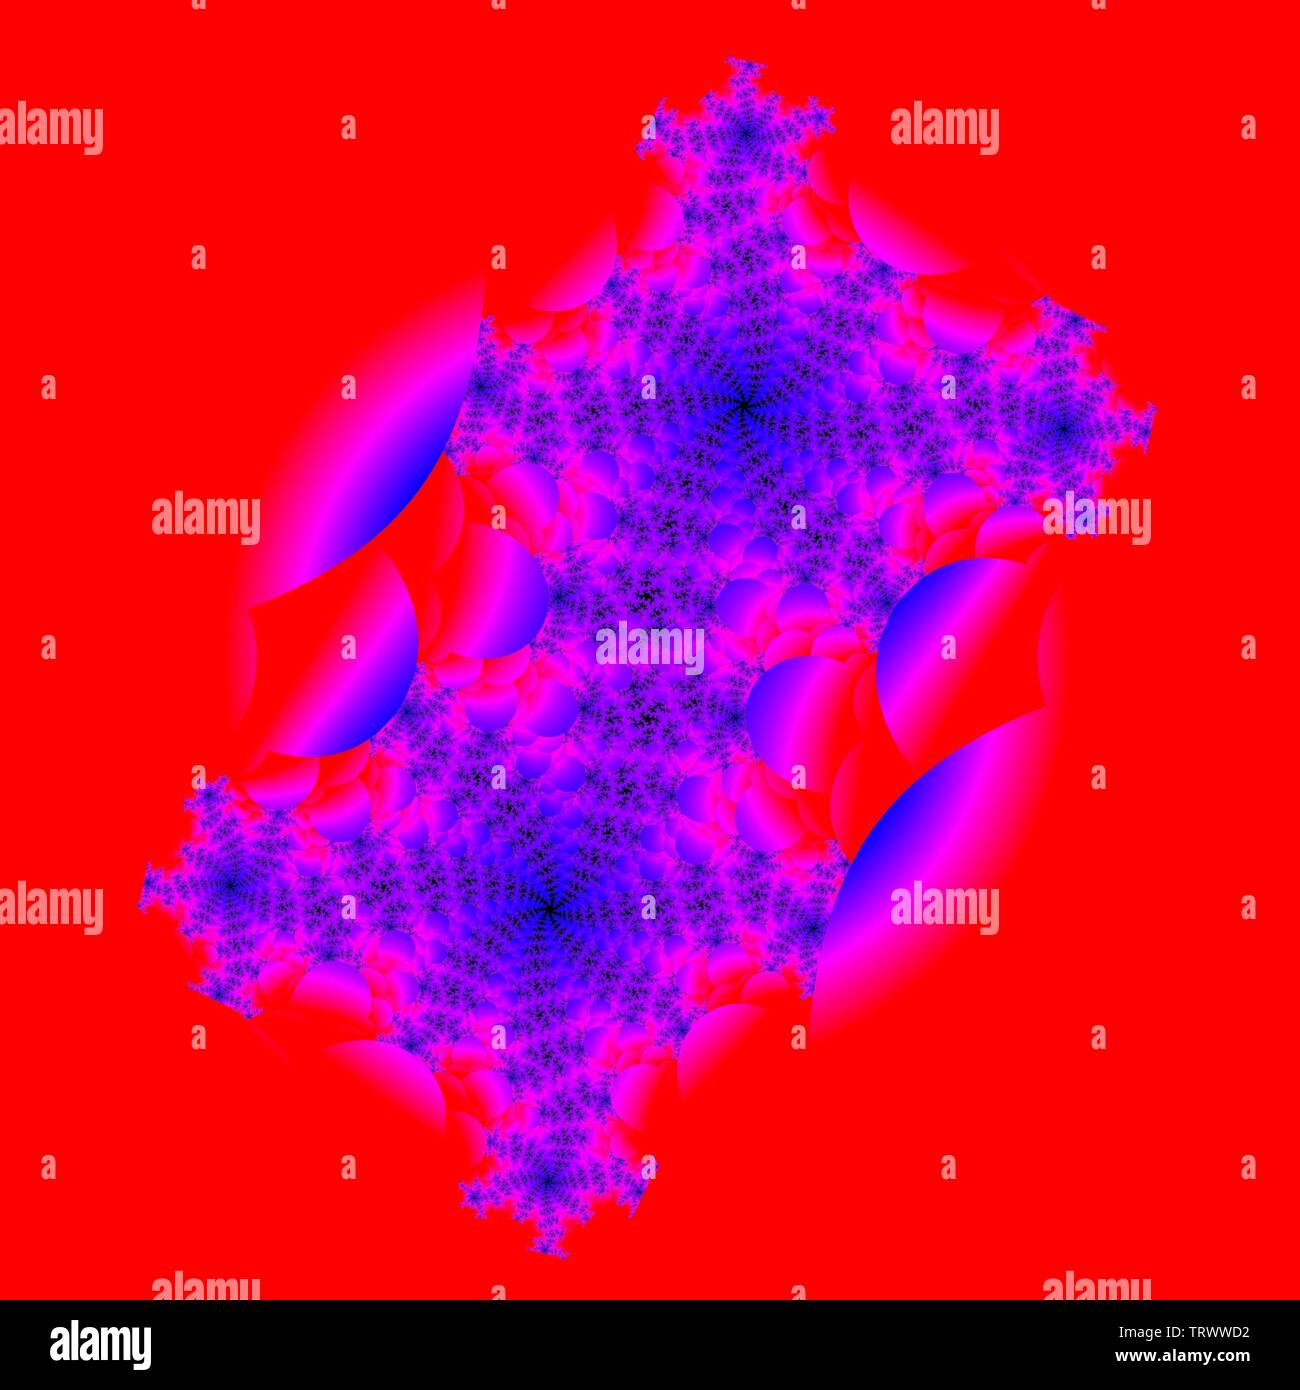 An image created using computer graphics. It is a picture of a mathematical object called a fractal, created using complex numbers. Stock Photo